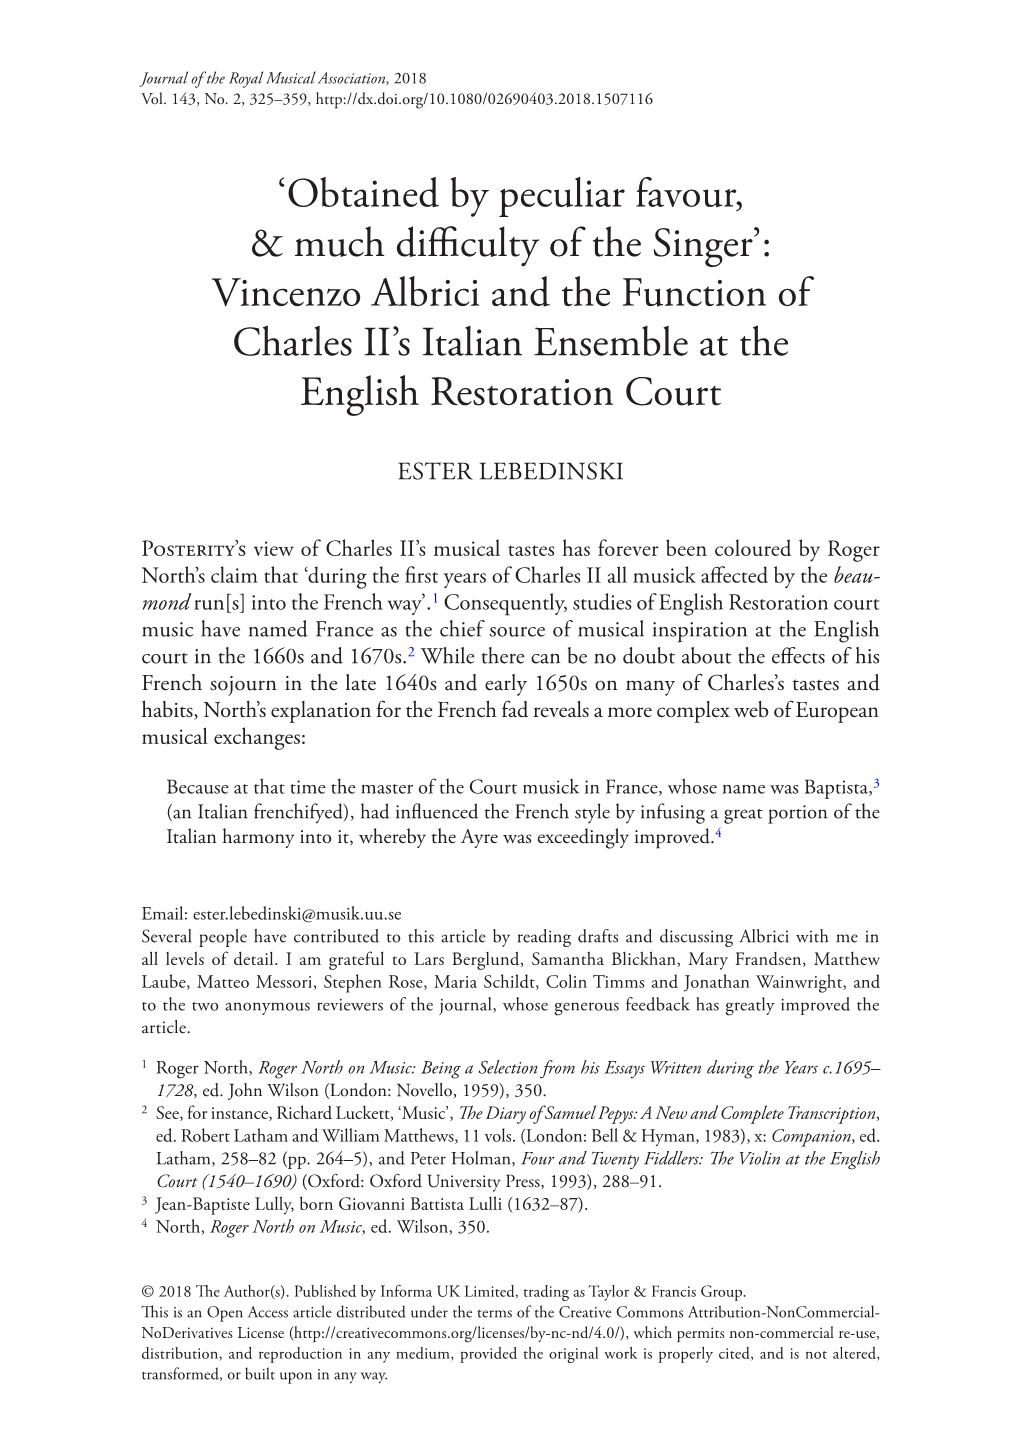 'Obtained by Peculiar Favour, & Much Diiculty of the Singer': Vincenzo